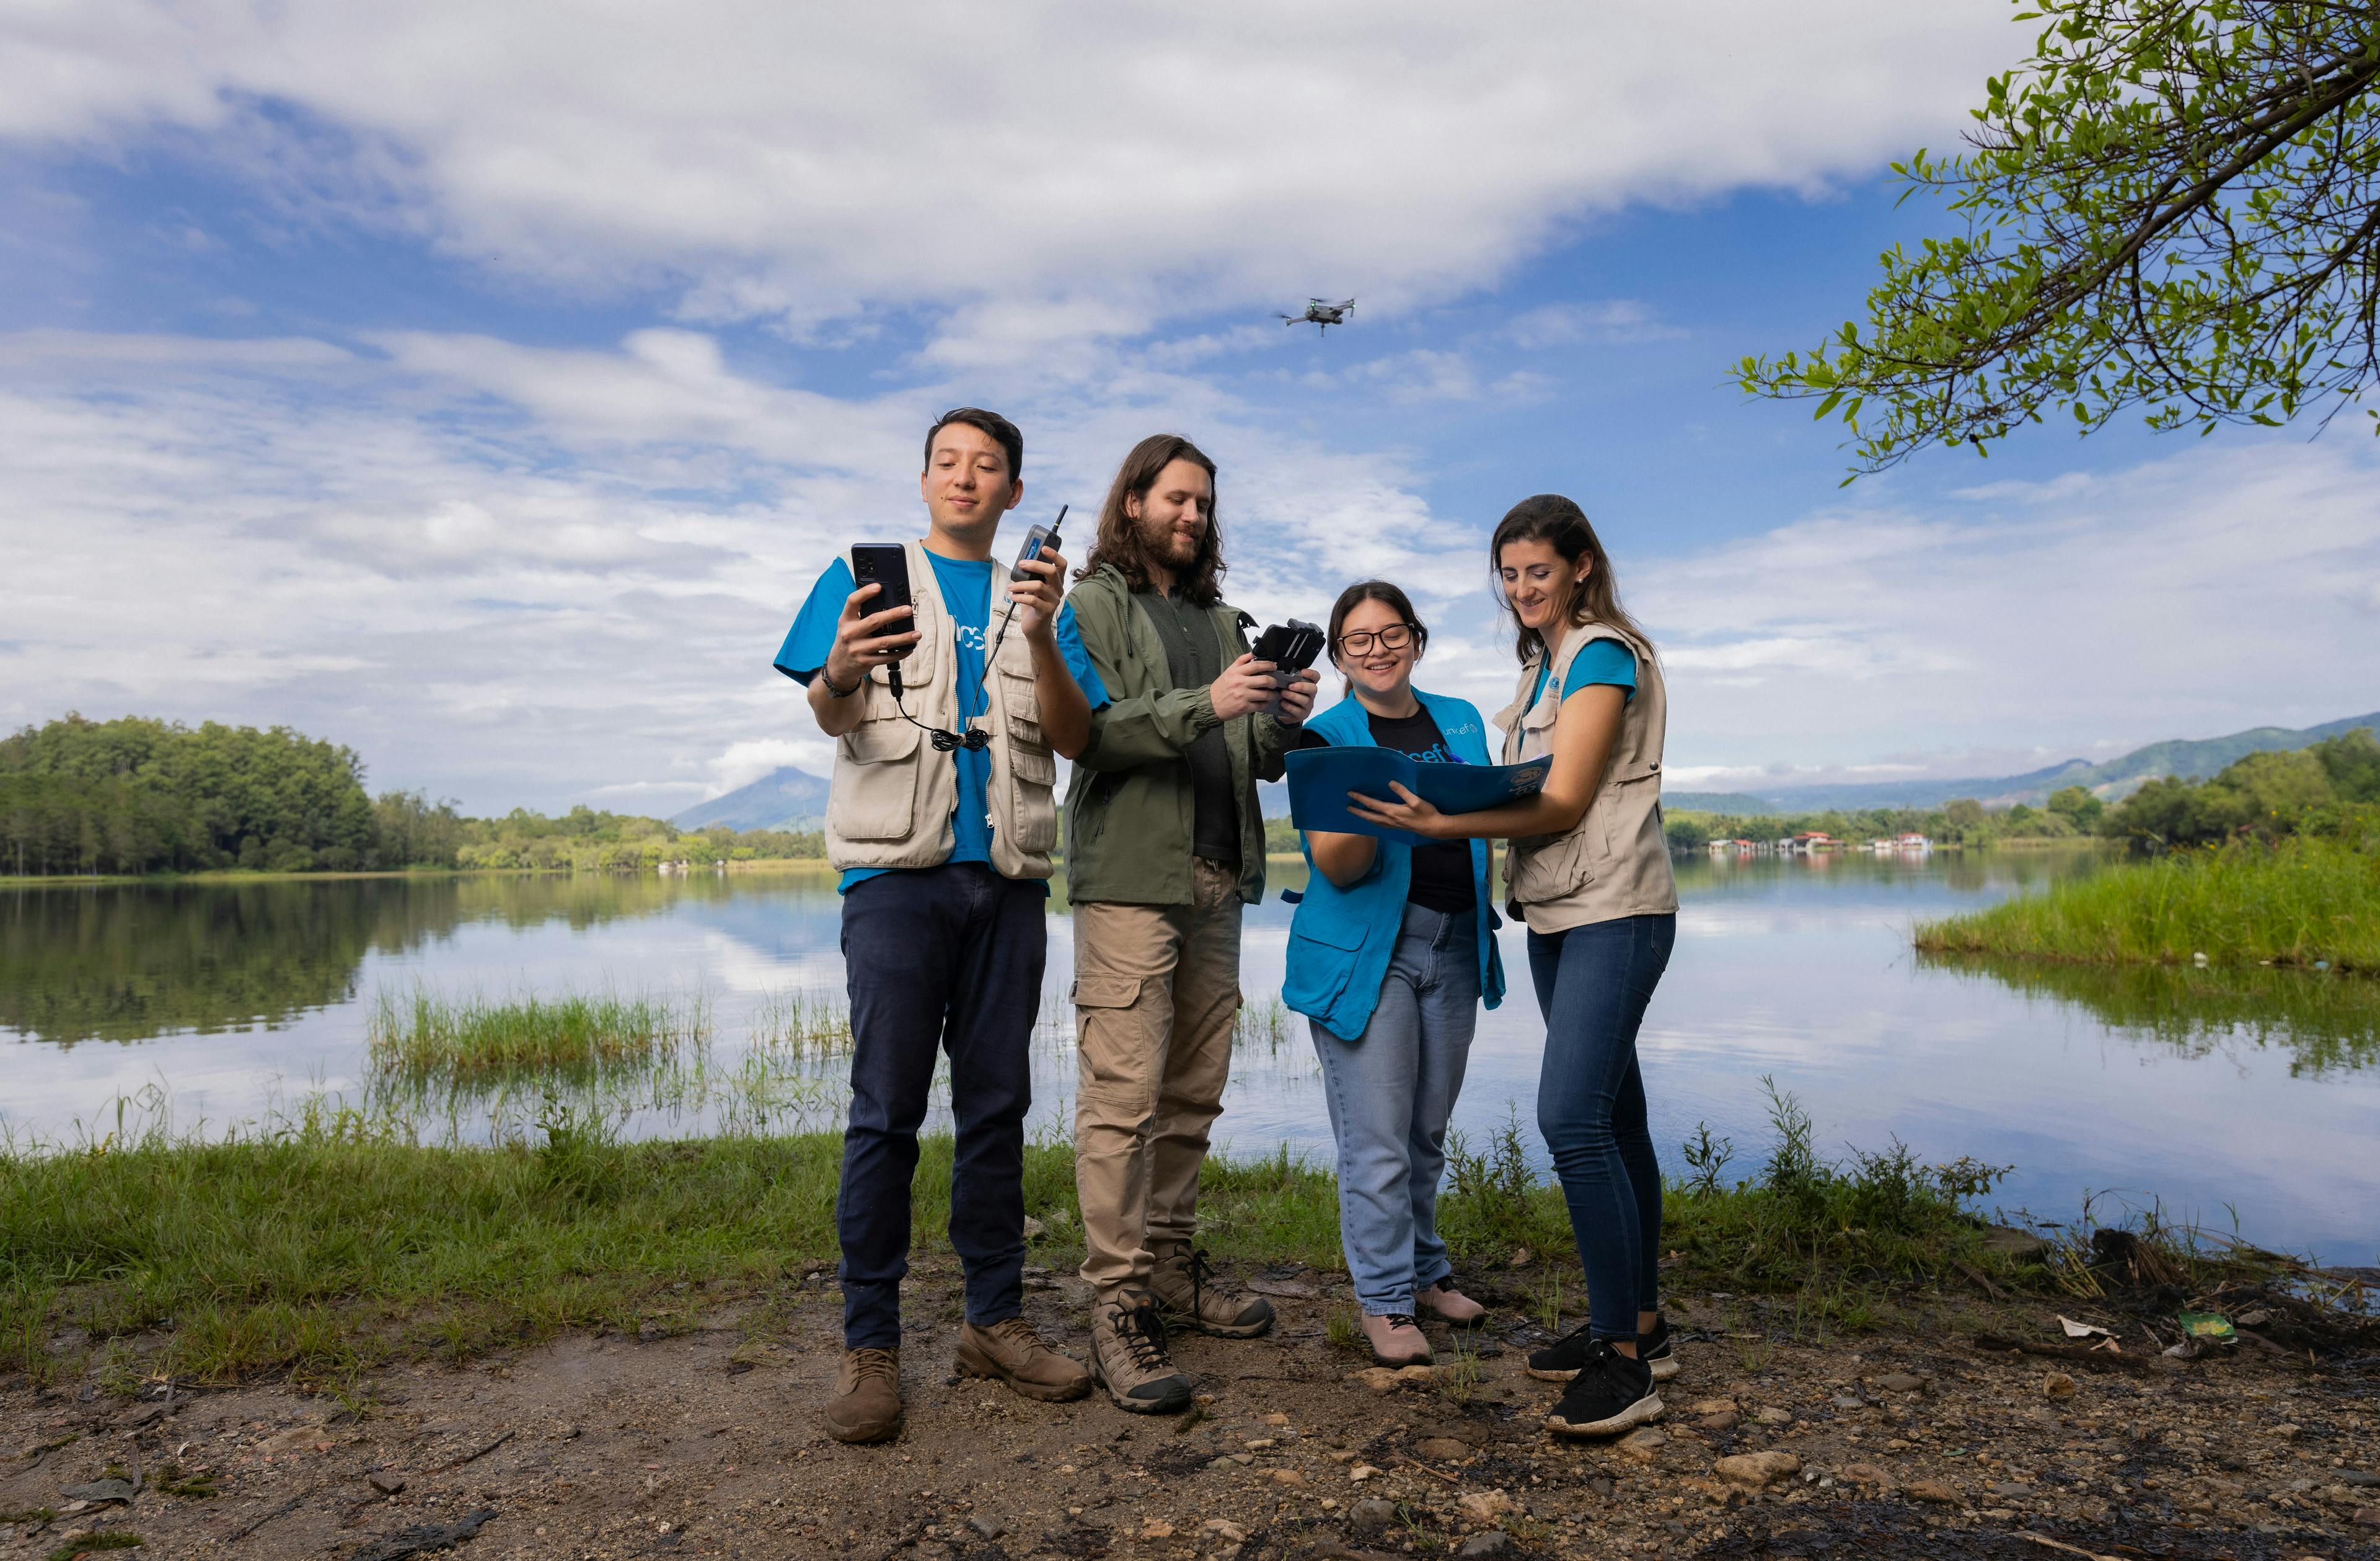 UNICEF Guatemala team members Maria Del Pilar Escudero, Ana Isabel Interiano Perez and Juan José Cifuentes, and Dan Alvarez, drone engineer from the company Aerobots in Guatemala and team member of the UNICEF-led Dronebots project.